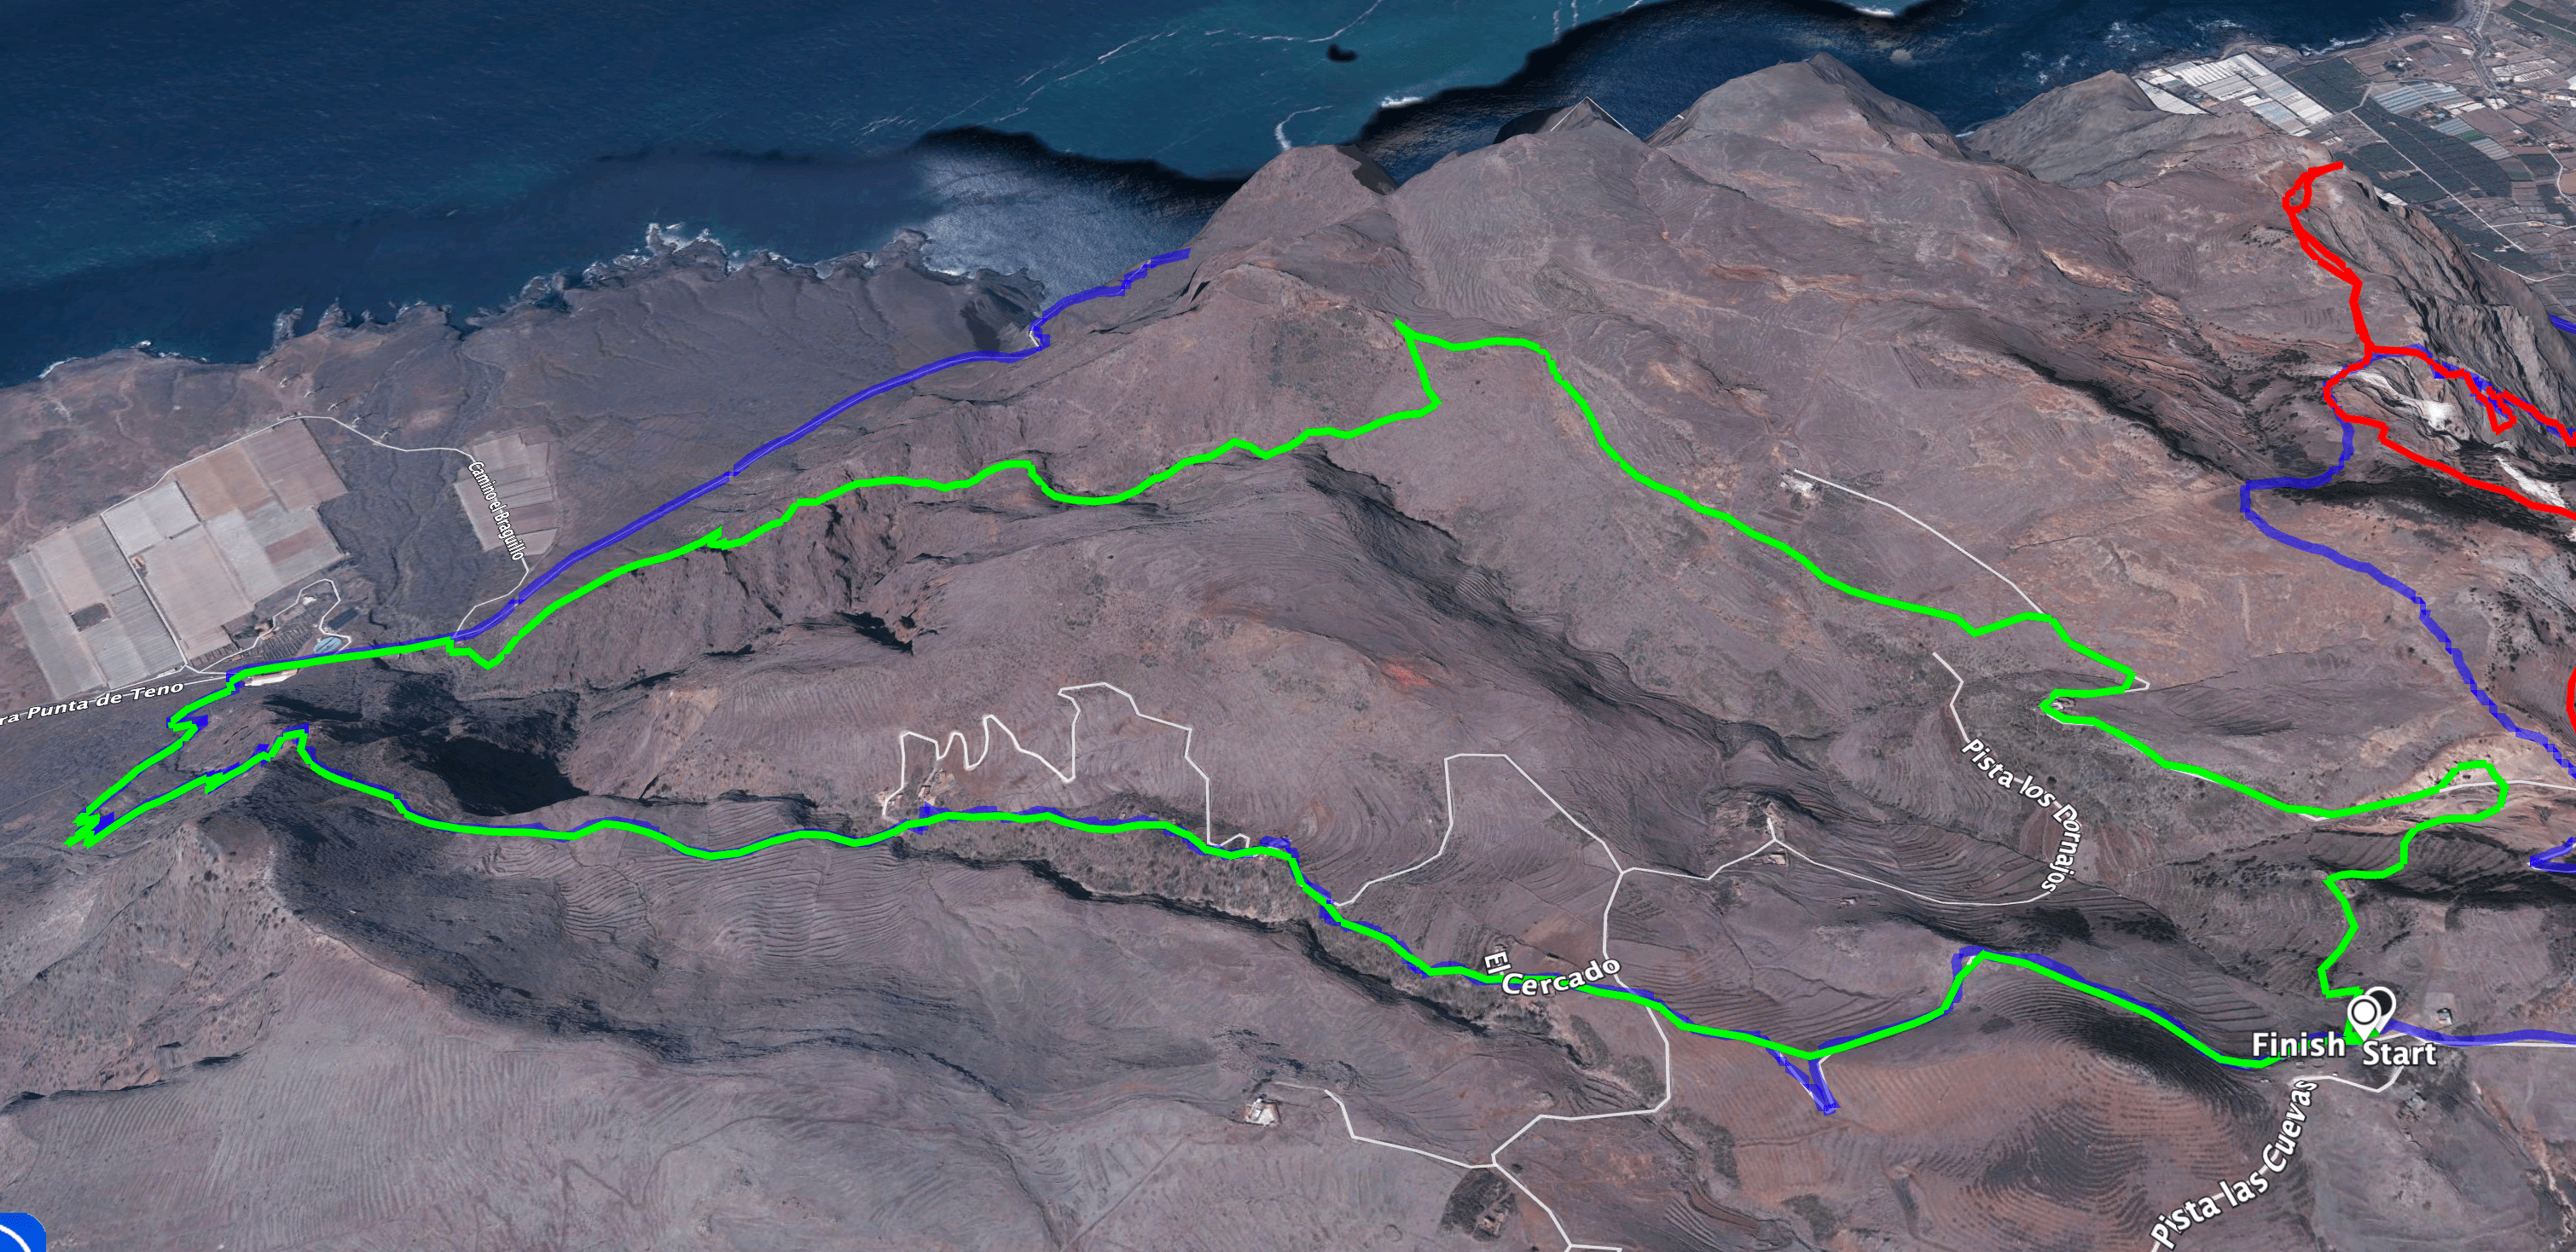 Track of the hike in the northern Teno Mountains